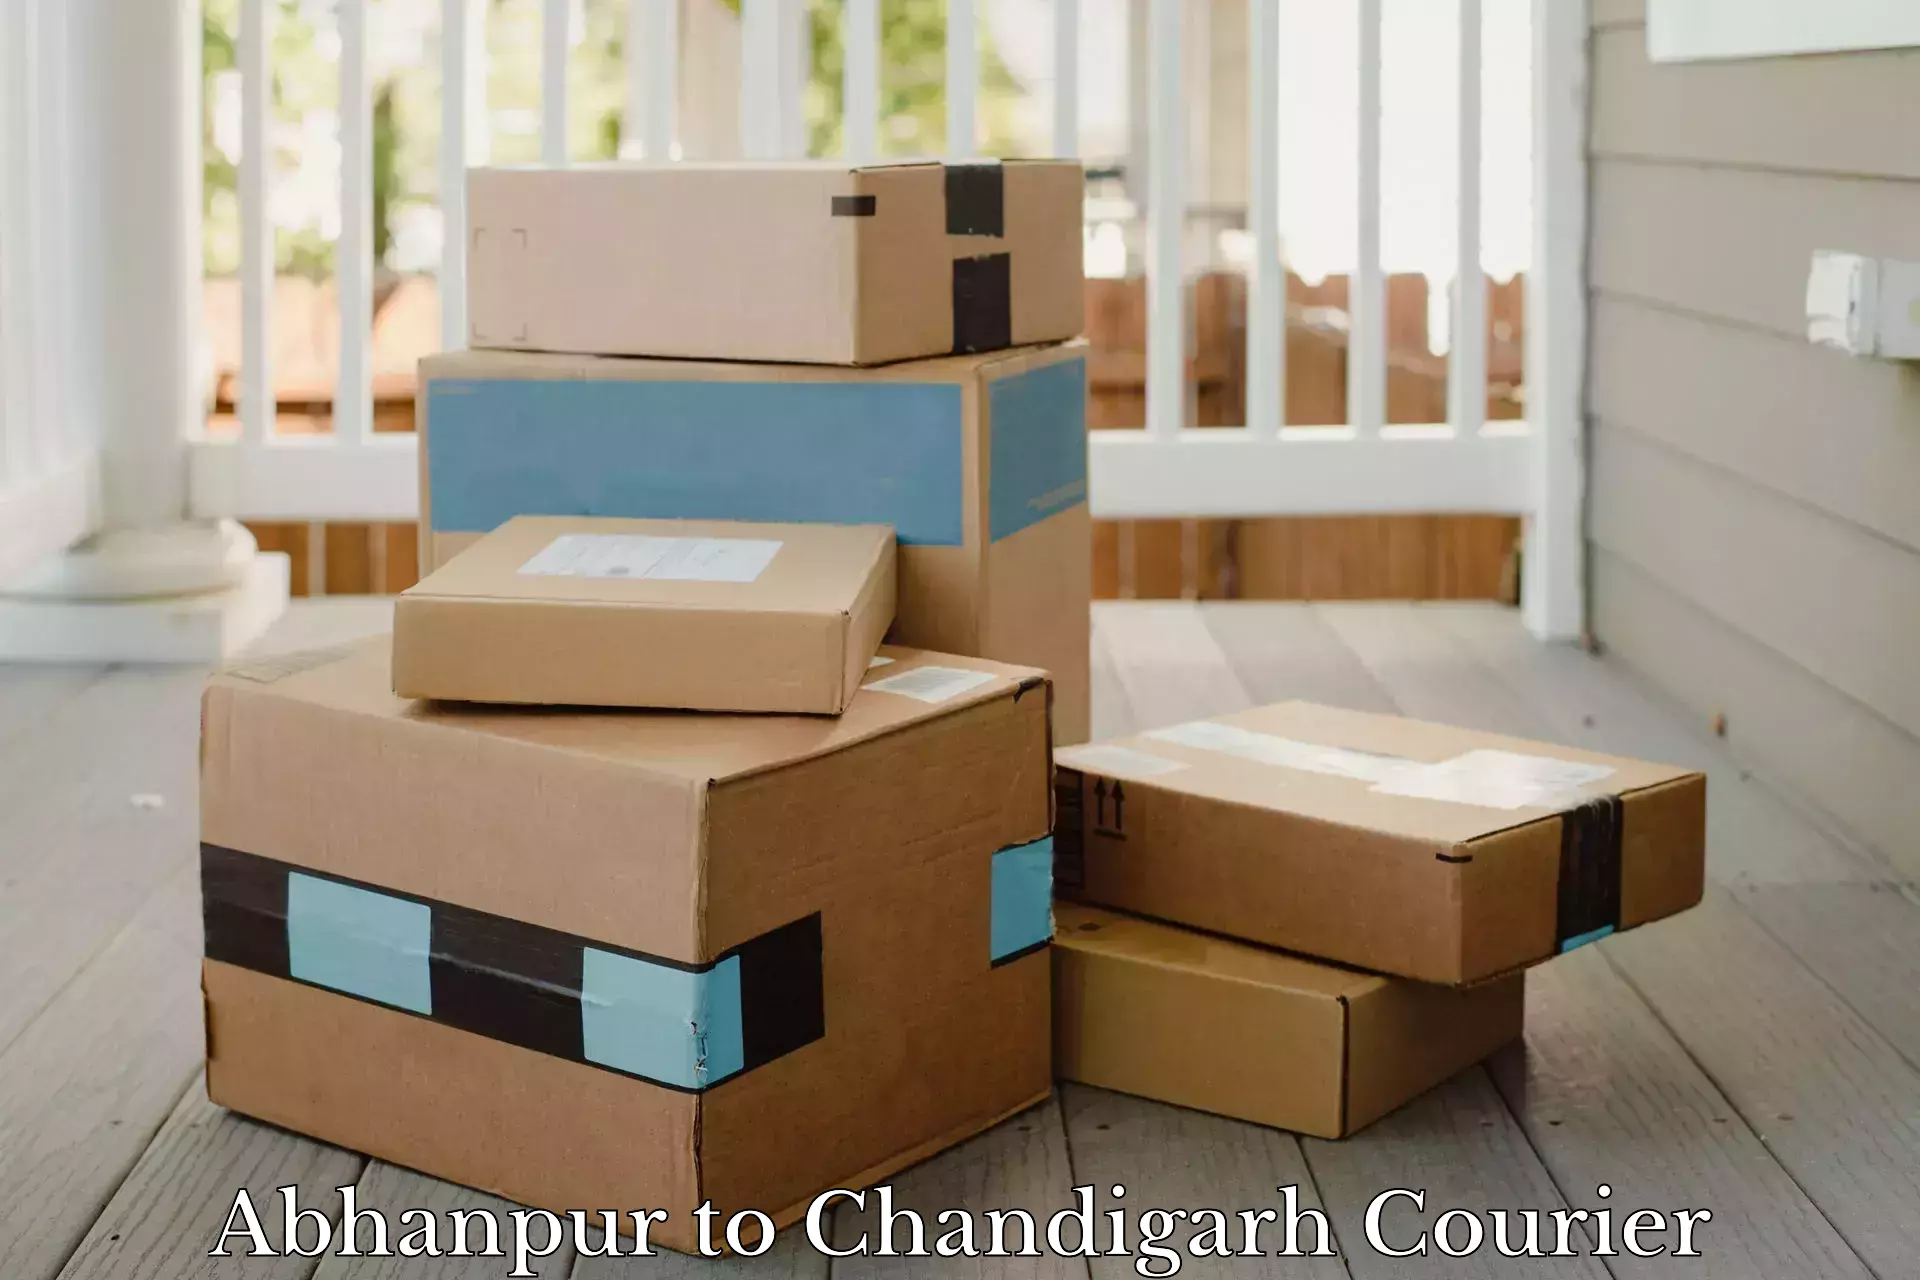 Express delivery capabilities Abhanpur to Panjab University Chandigarh